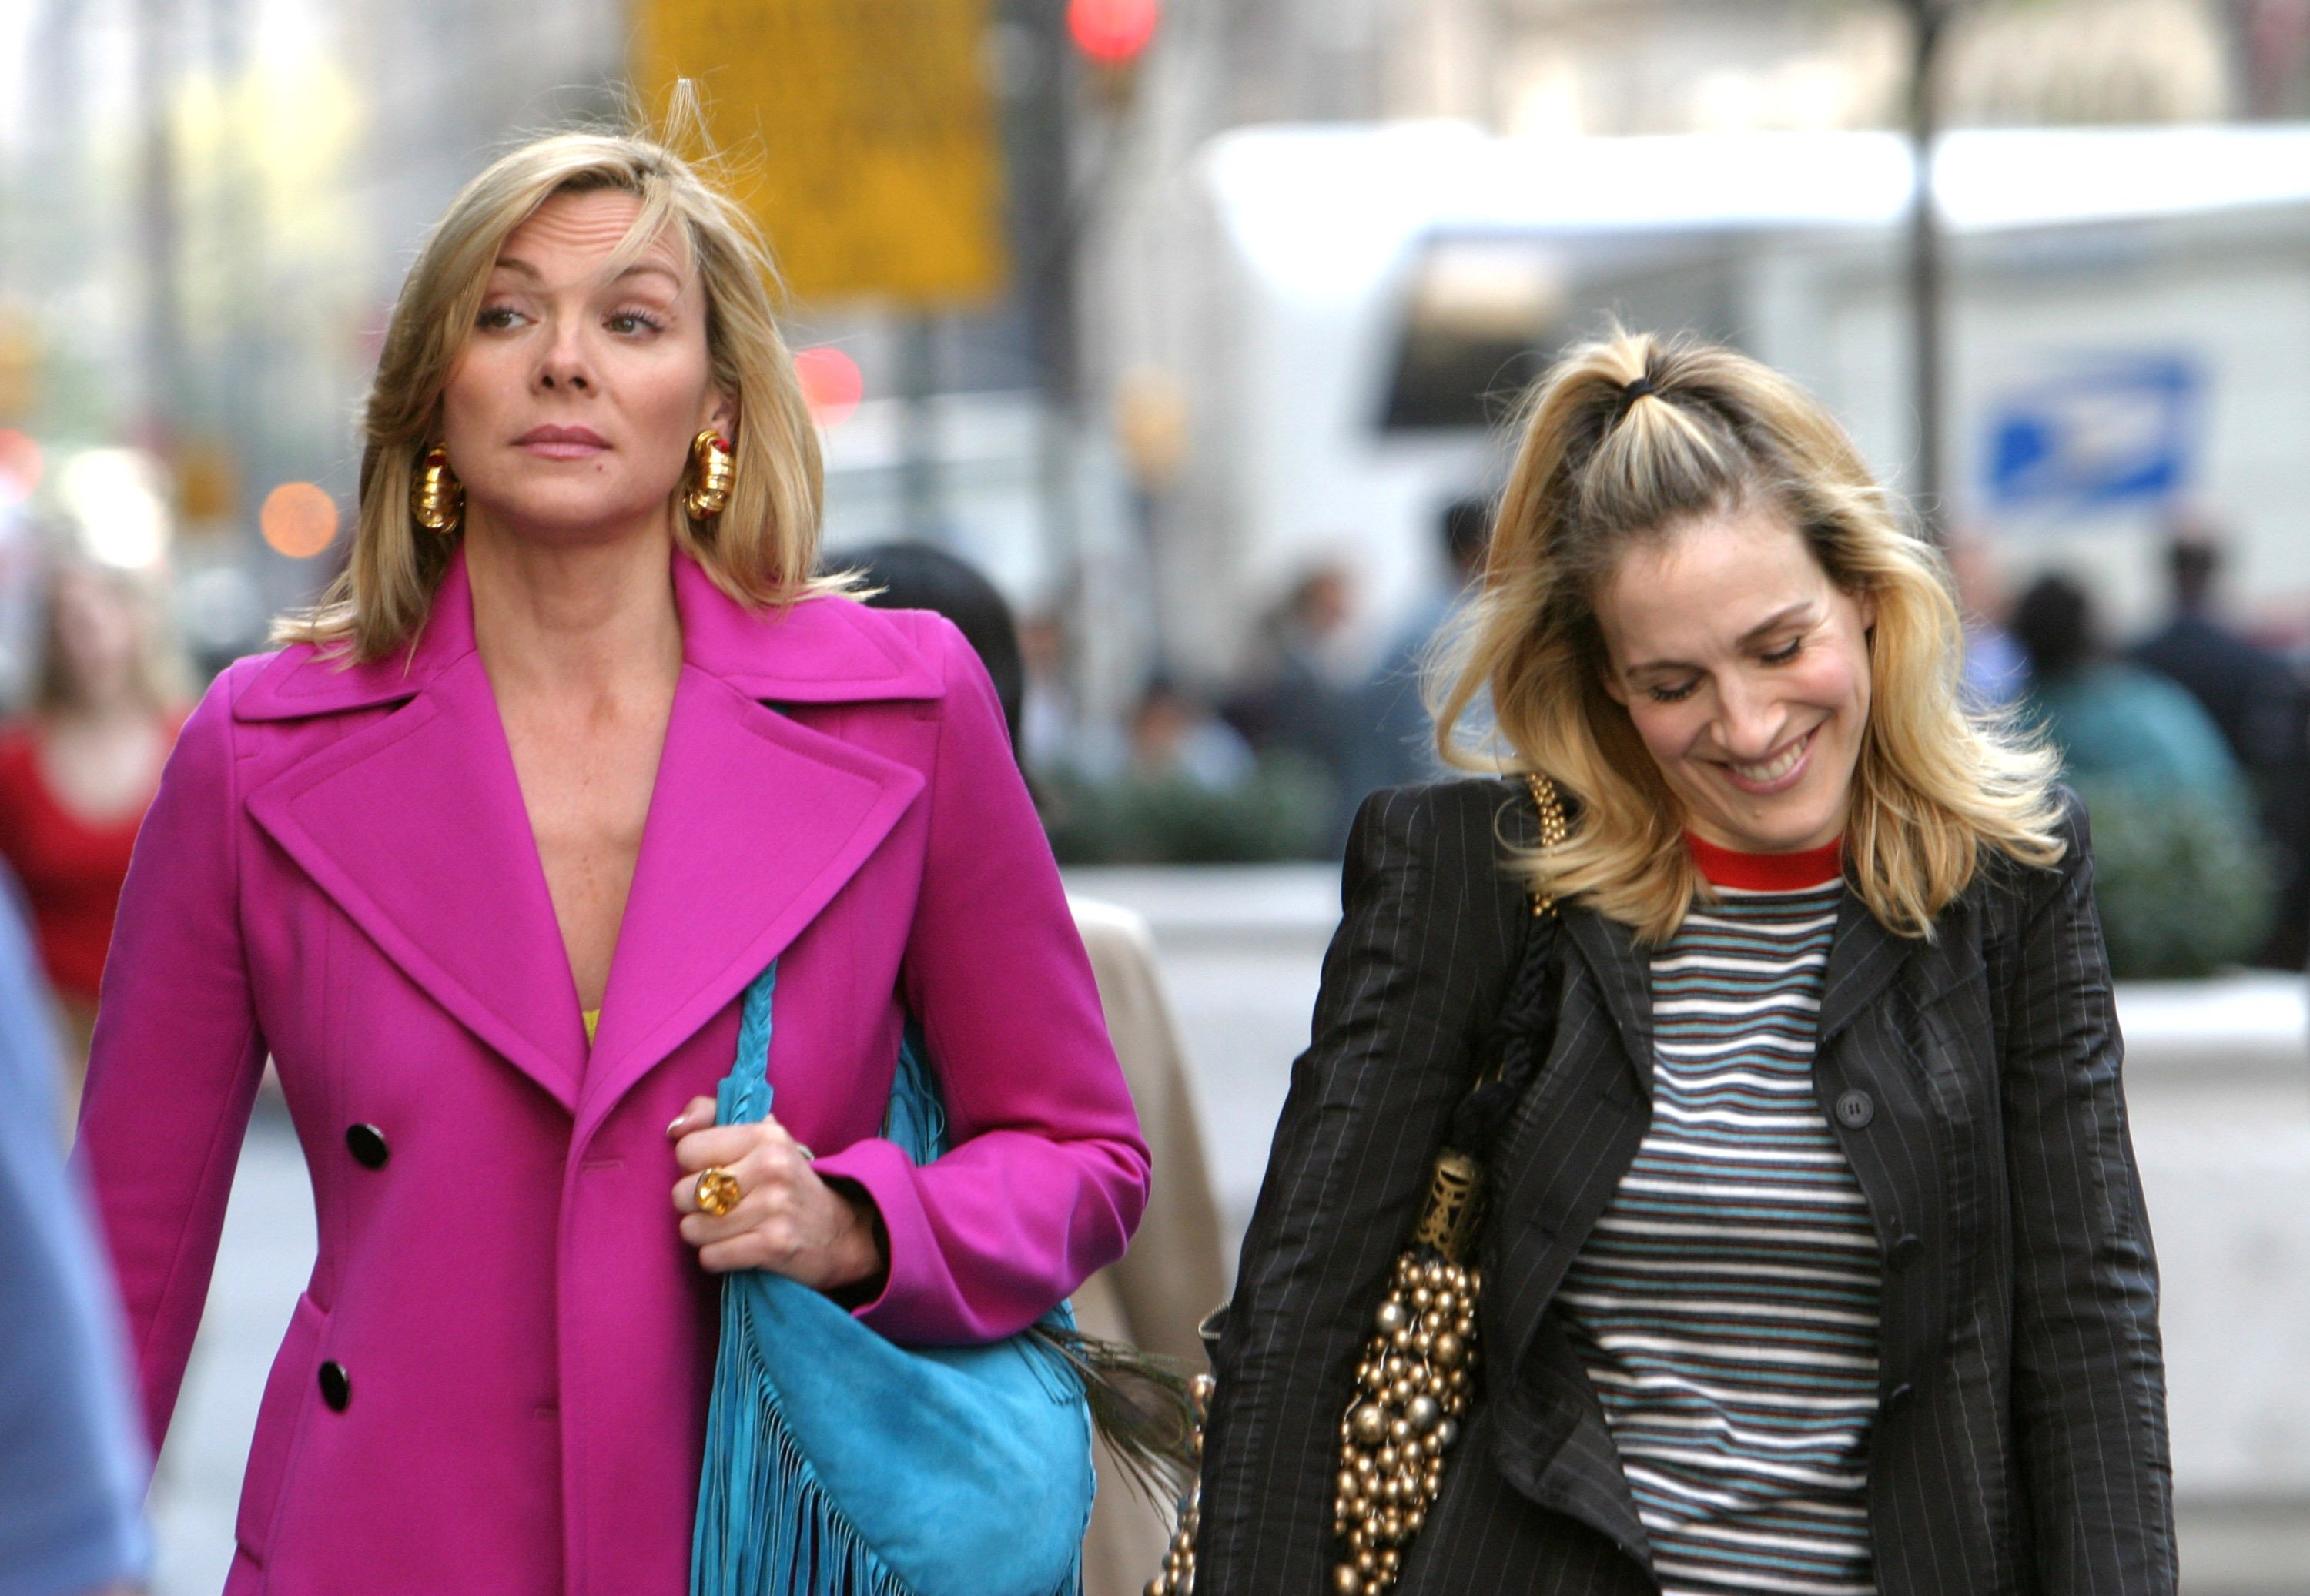 Samantha Jones and Carrie Bradshaw in 'Sex and the City'. It is an unpopular 'And Just Like That...' opinion, but Samantha didn't bleong in the HBO Max reboot of the series